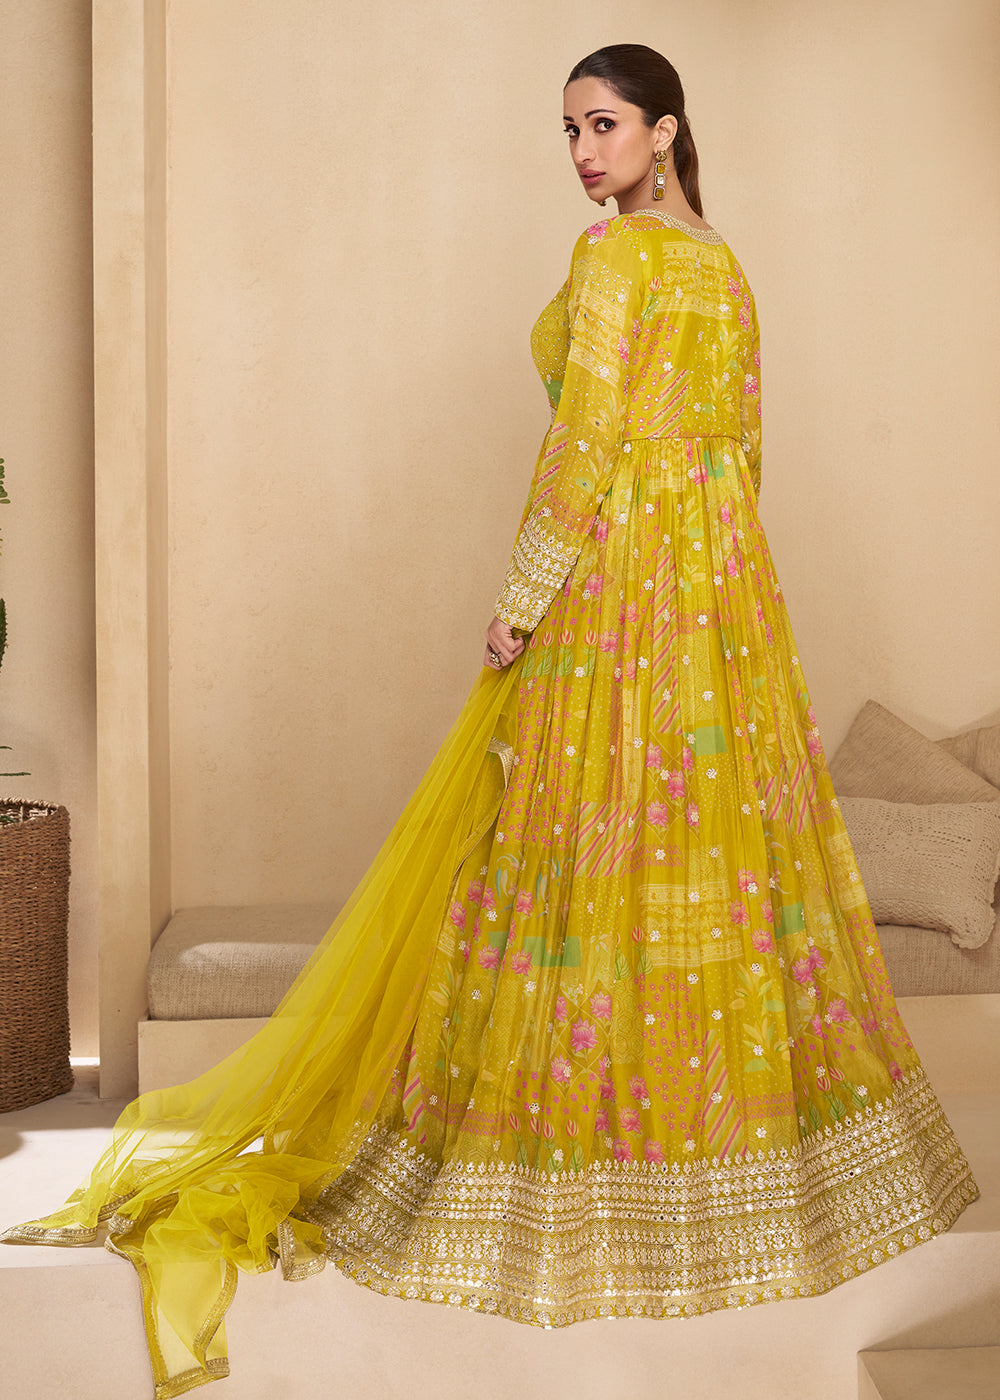 Buy Now Sequins Work Embroidered Yellow Wedding Anarkali Gown Online in USA, UK, Australia, Canada & Worldwide at Empress Clothing.